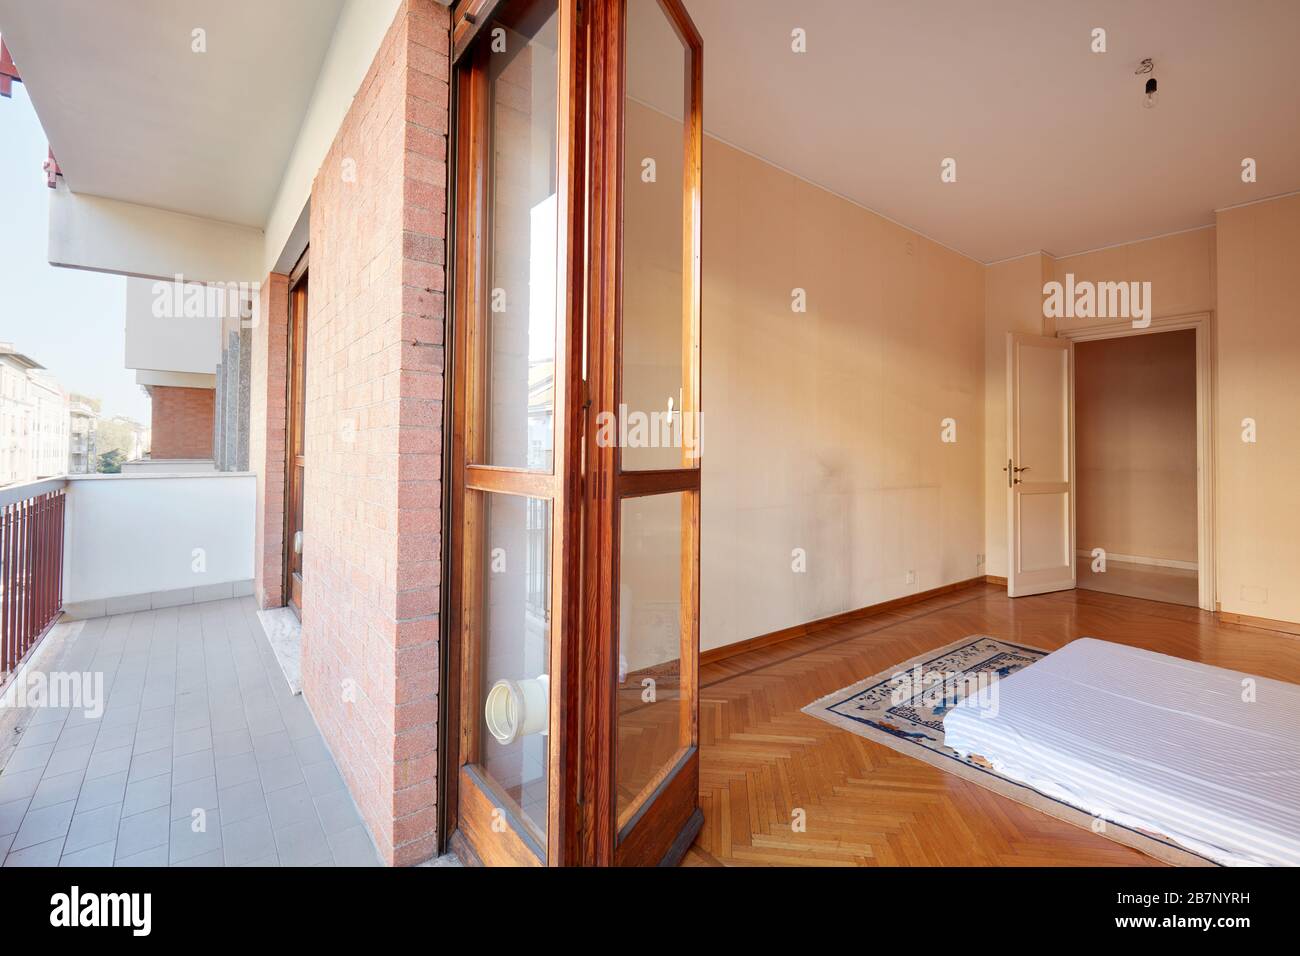 Bedroom with tatami bed and balcony in apartment Stock Photo